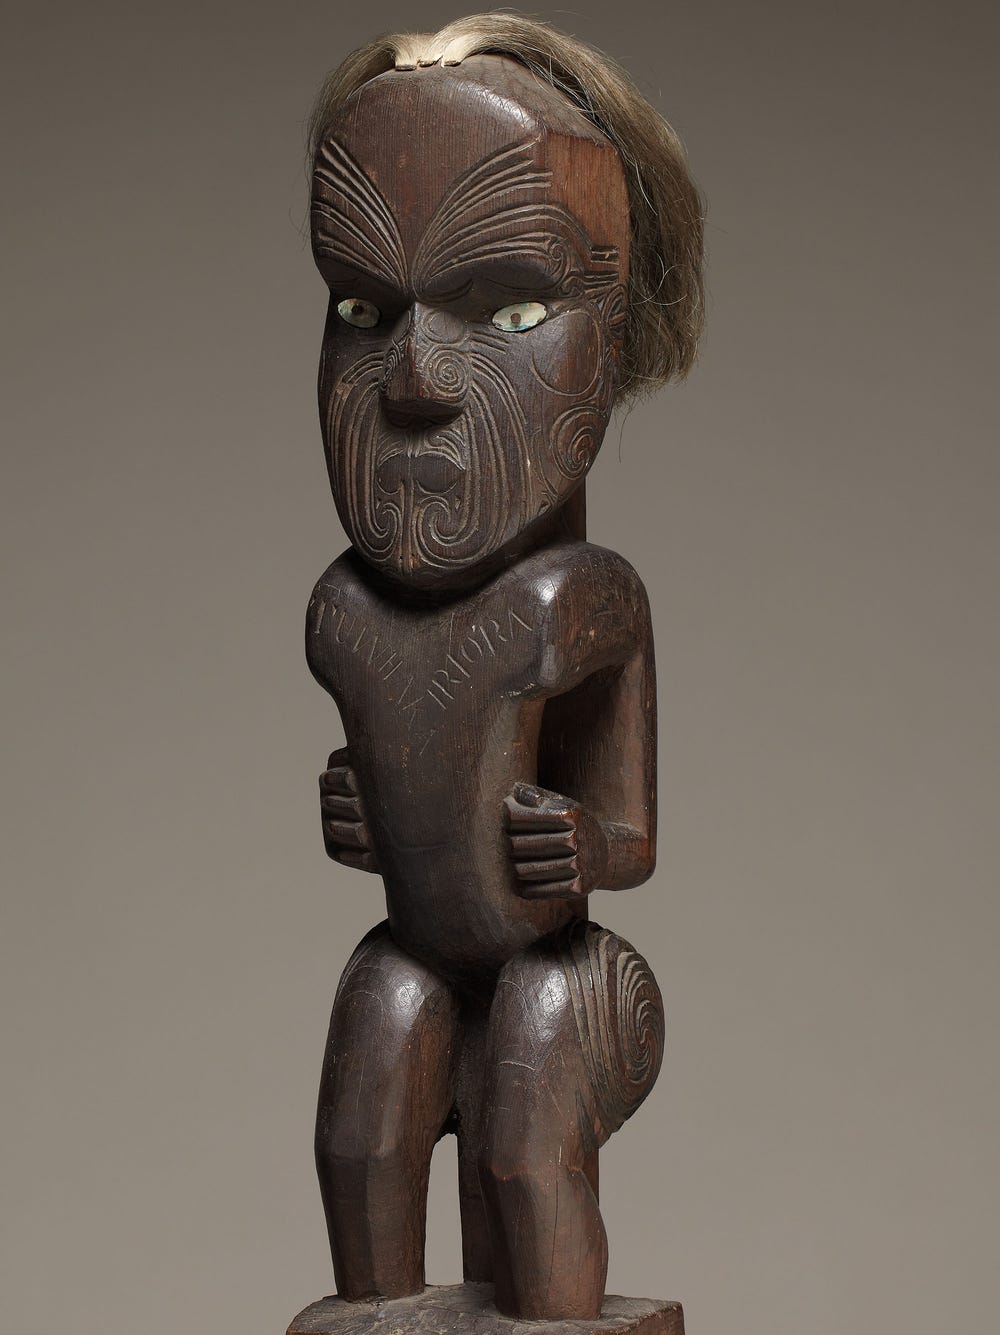 Intricate wooden sculpture of human figure with hair